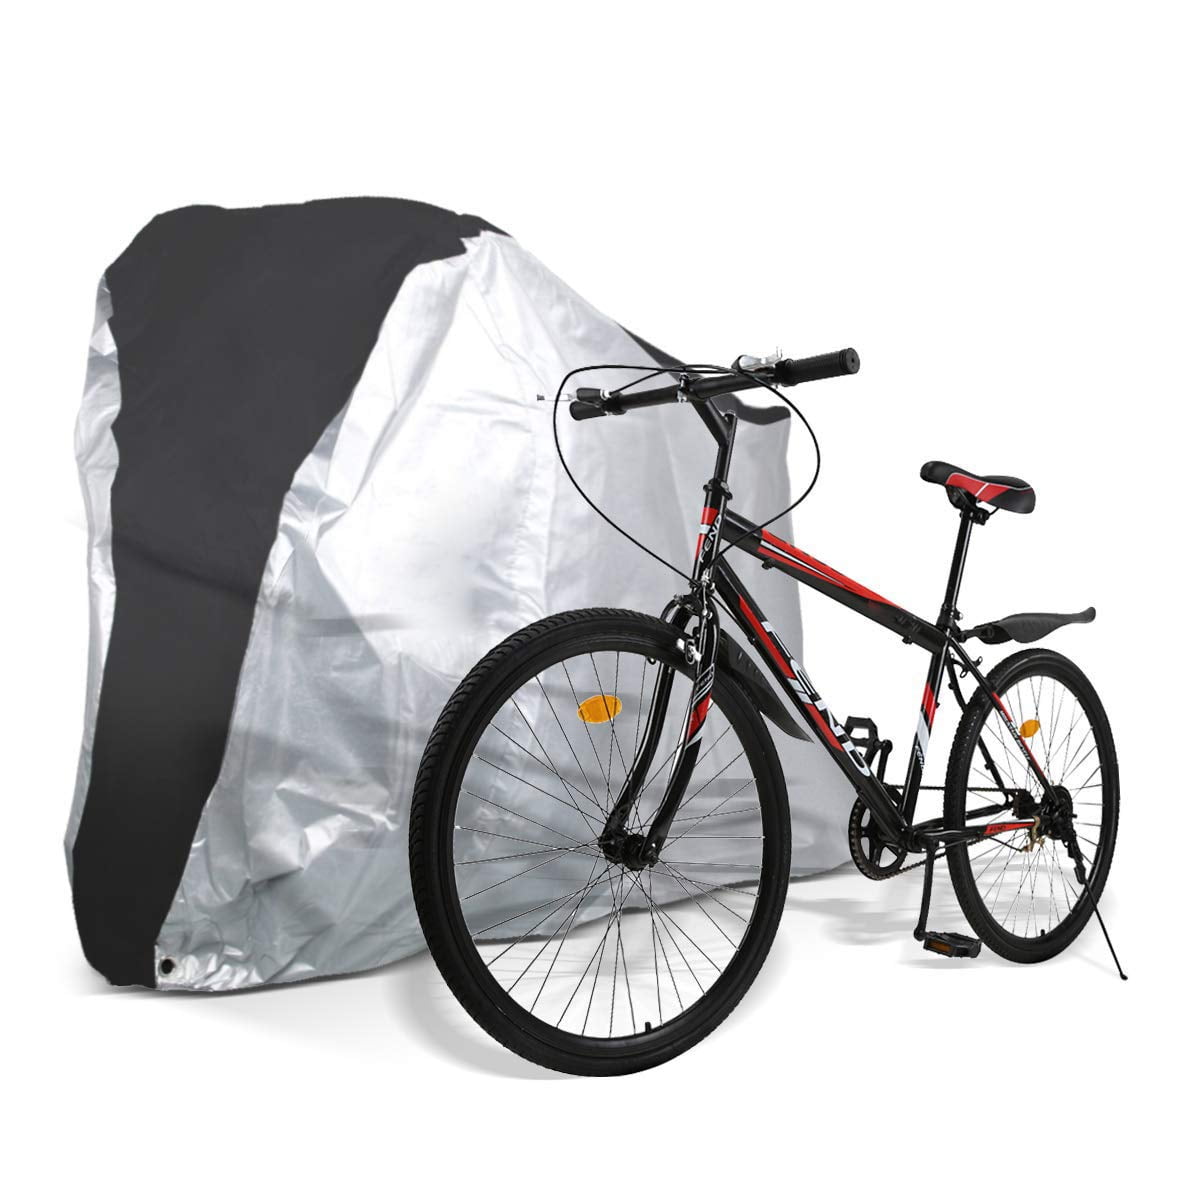 Universal Waterproof Nylon Bicycle Bike Scooter Cover Outdoor Protector Black 